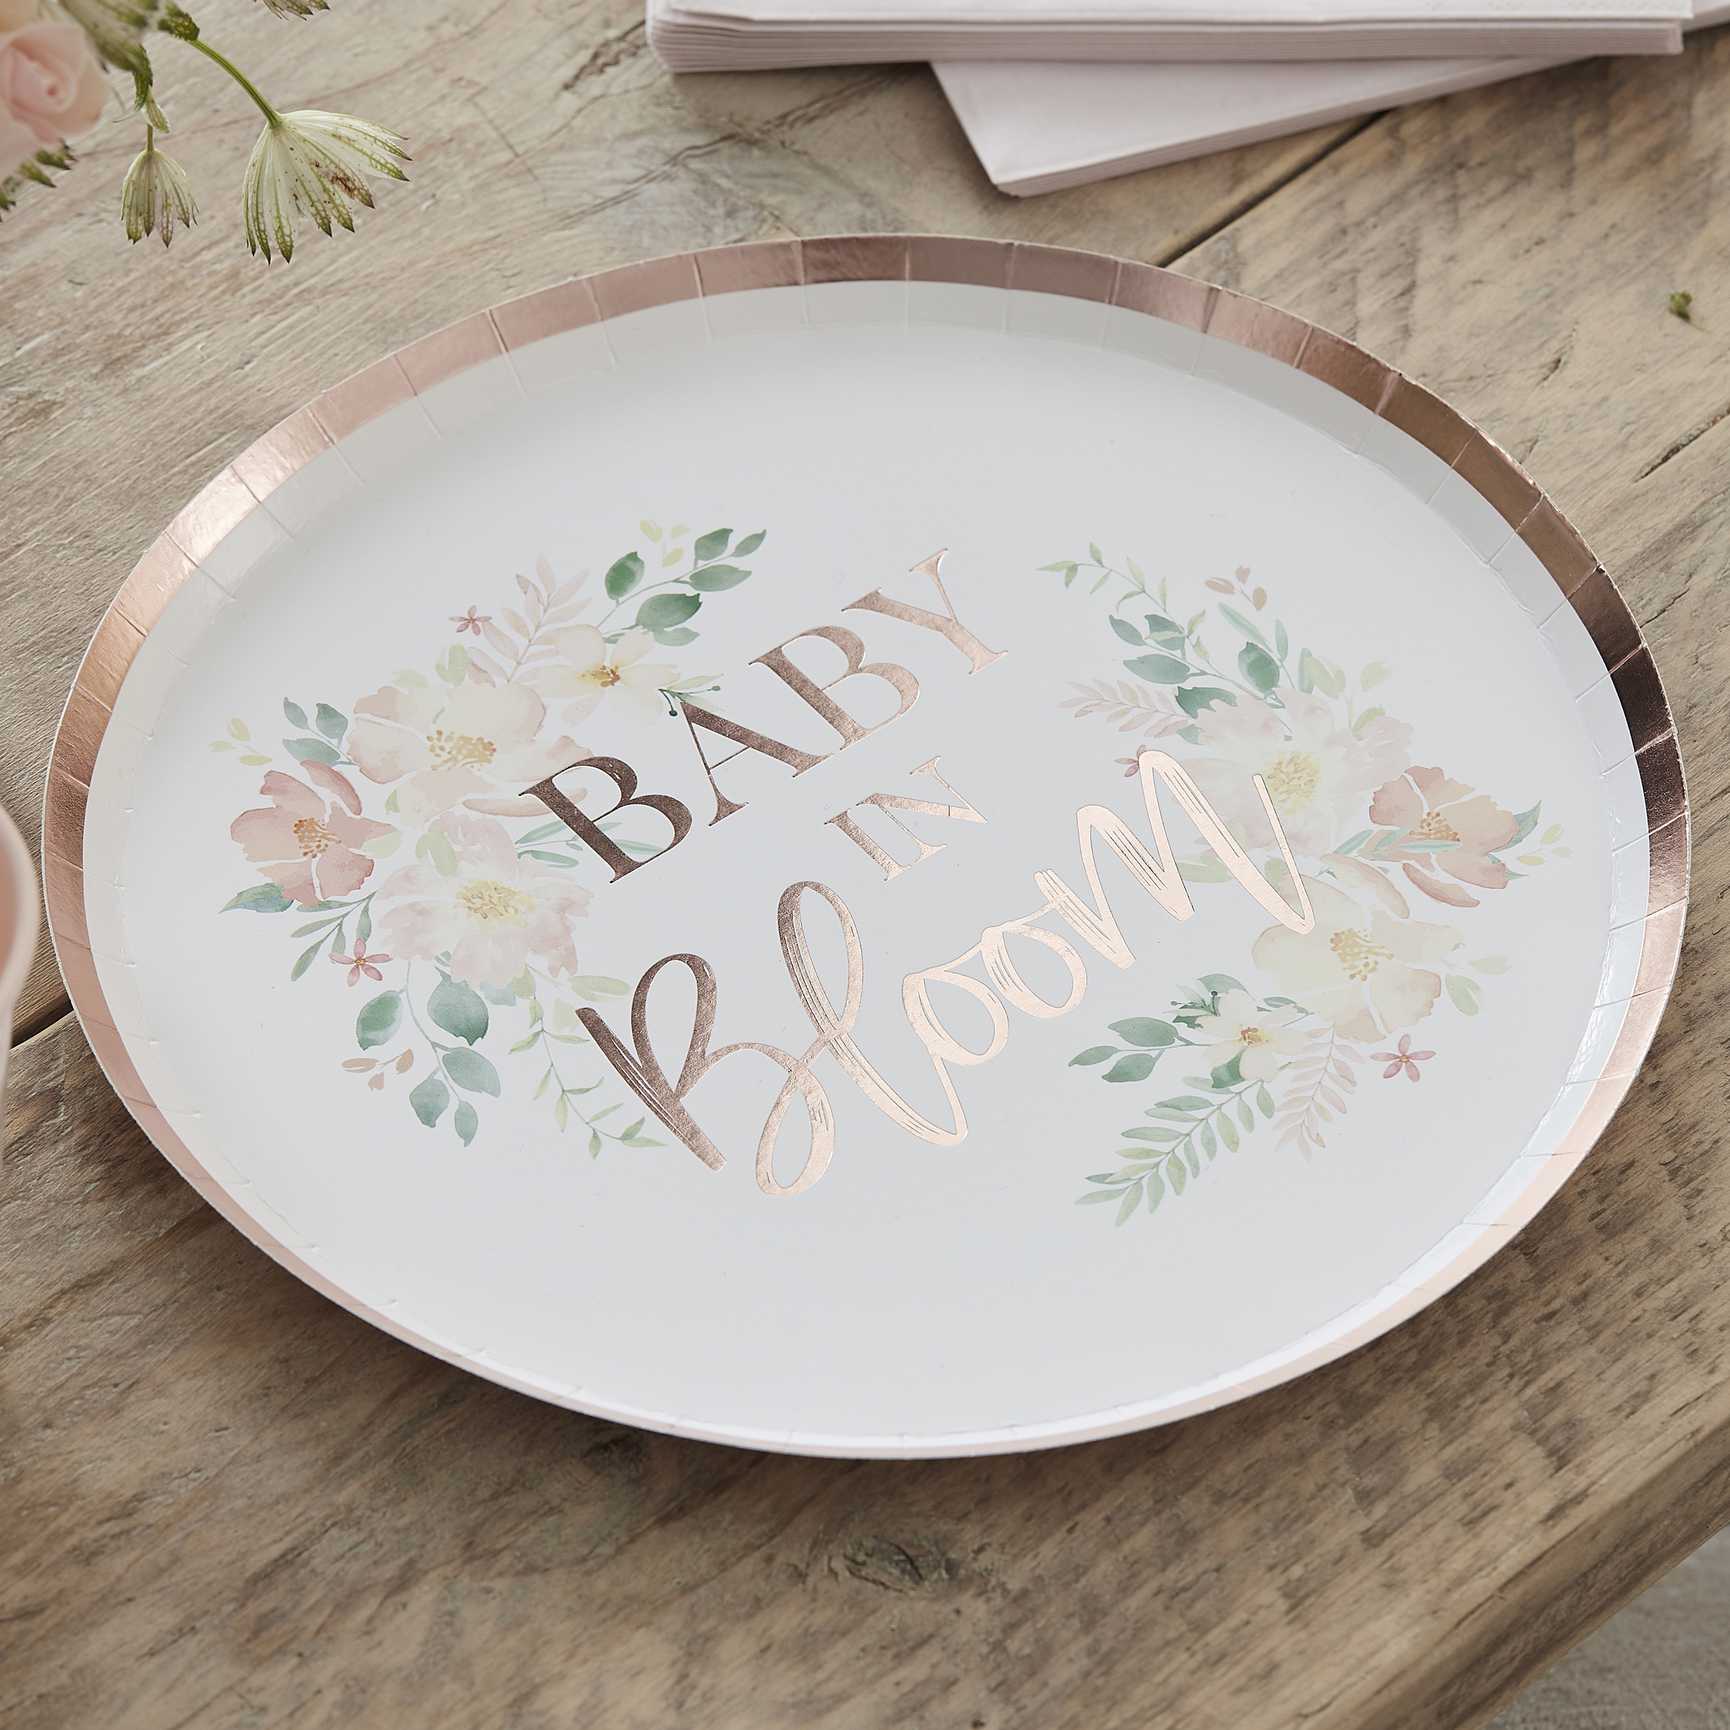 Assiettes "Baby in bloom" Baby shower x 8